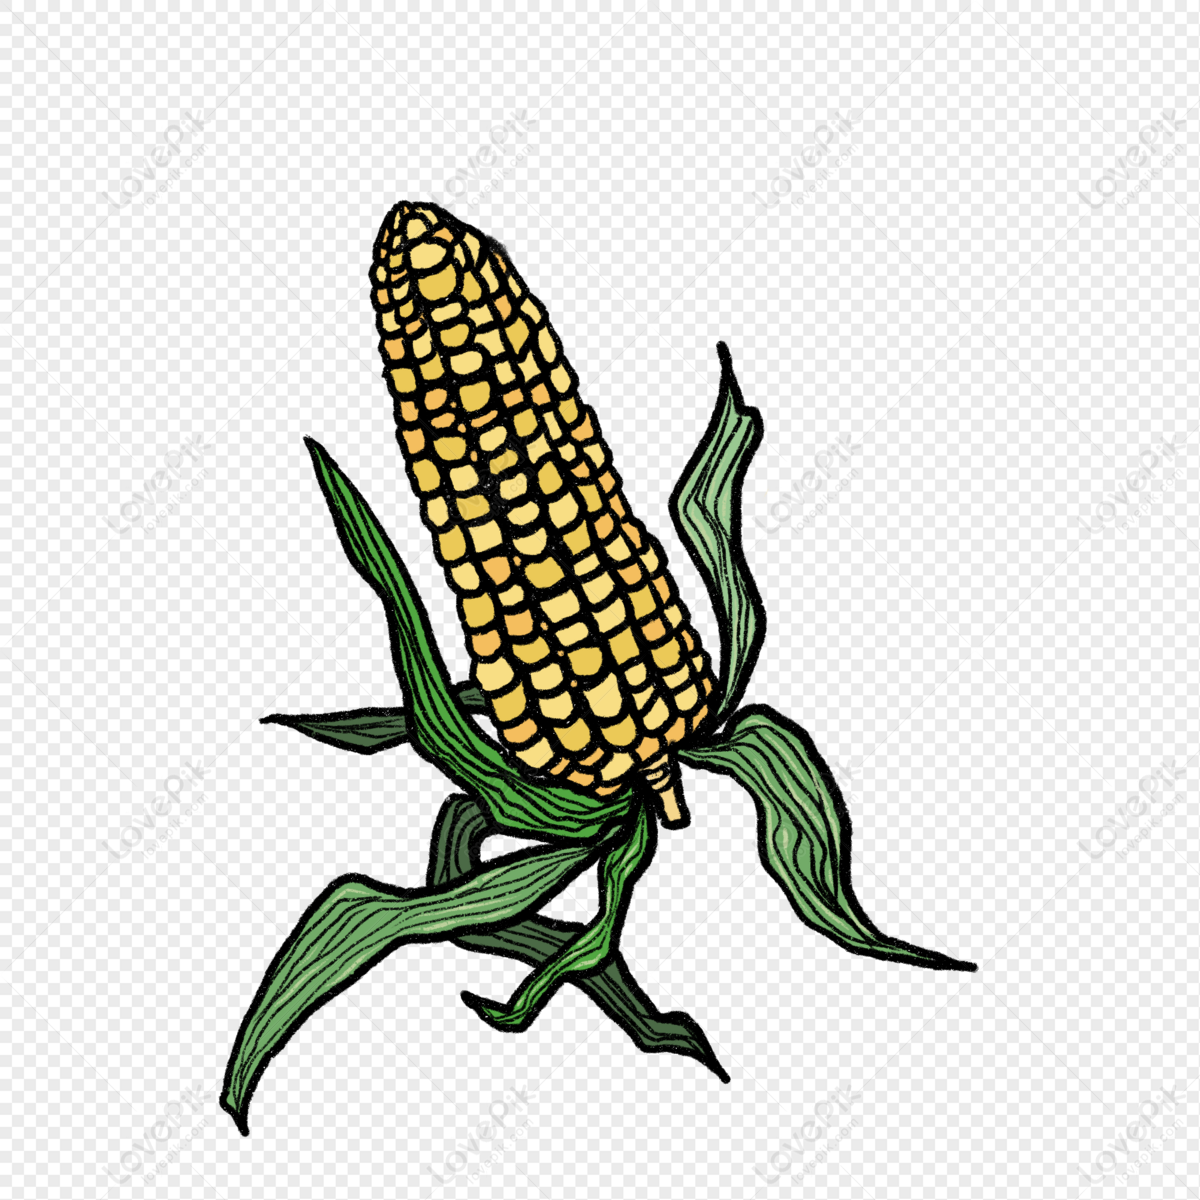 A Corn On The Cob Cartoon Illustration PNG Transparent Background And  Clipart Image For Free Download - Lovepik | 401301860